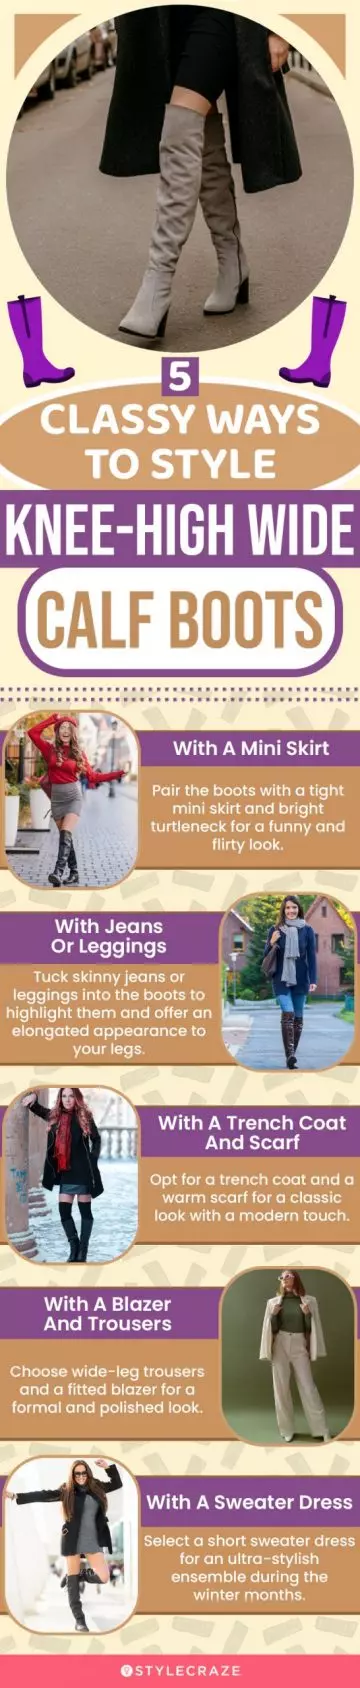 5 Classy Ways To Style Knee High Wide Calf Boots (infographic)